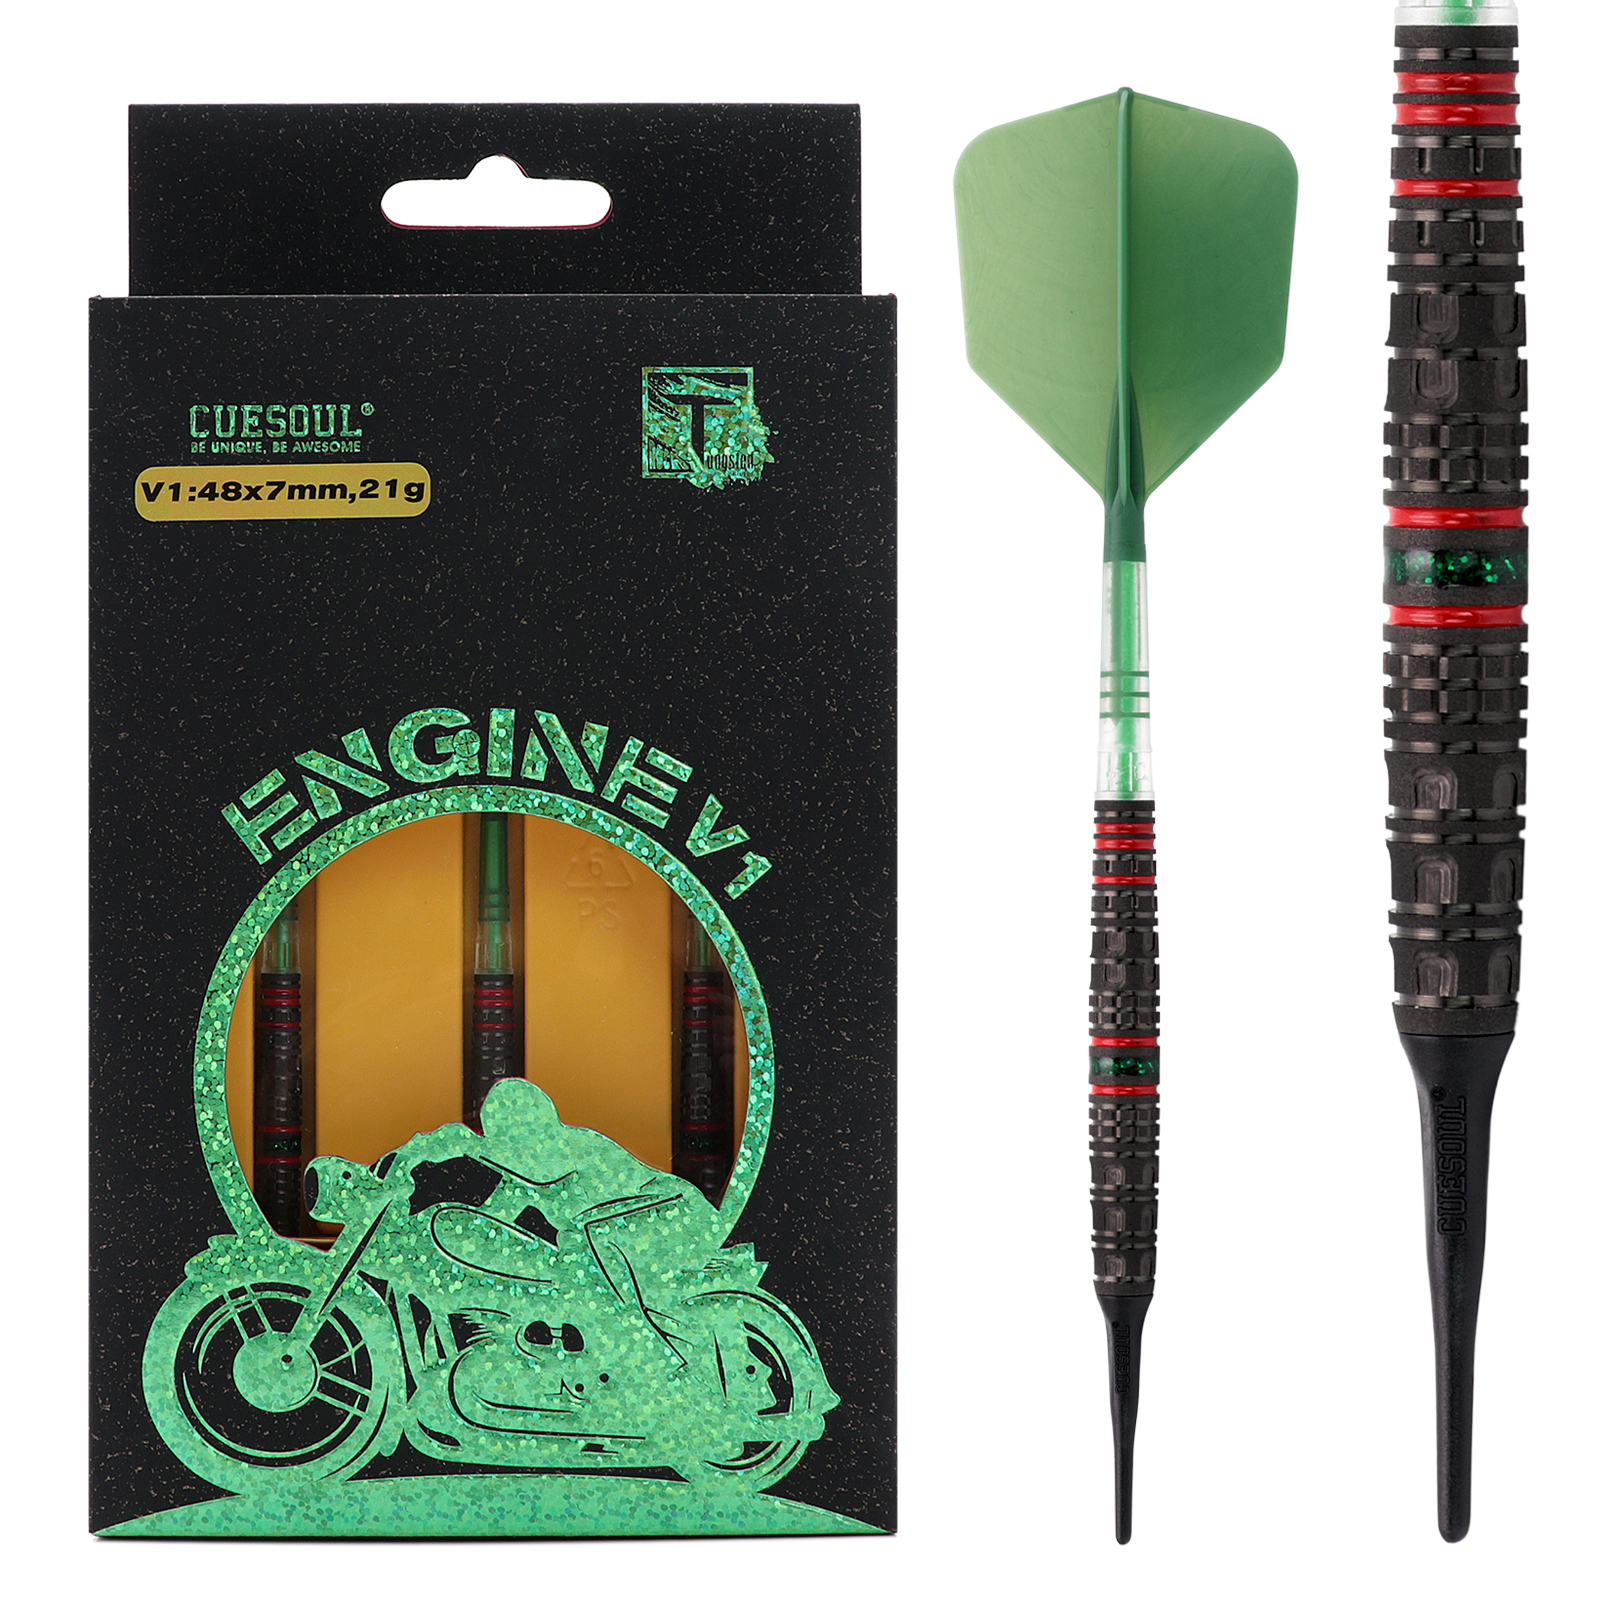 CUESOUL ENGINE V1-V6 18/19/20/21g Soft Tip 90% Tungsten Dart Set with Oil  Paint Finished and Unifying ROST T19 CARBON Flight